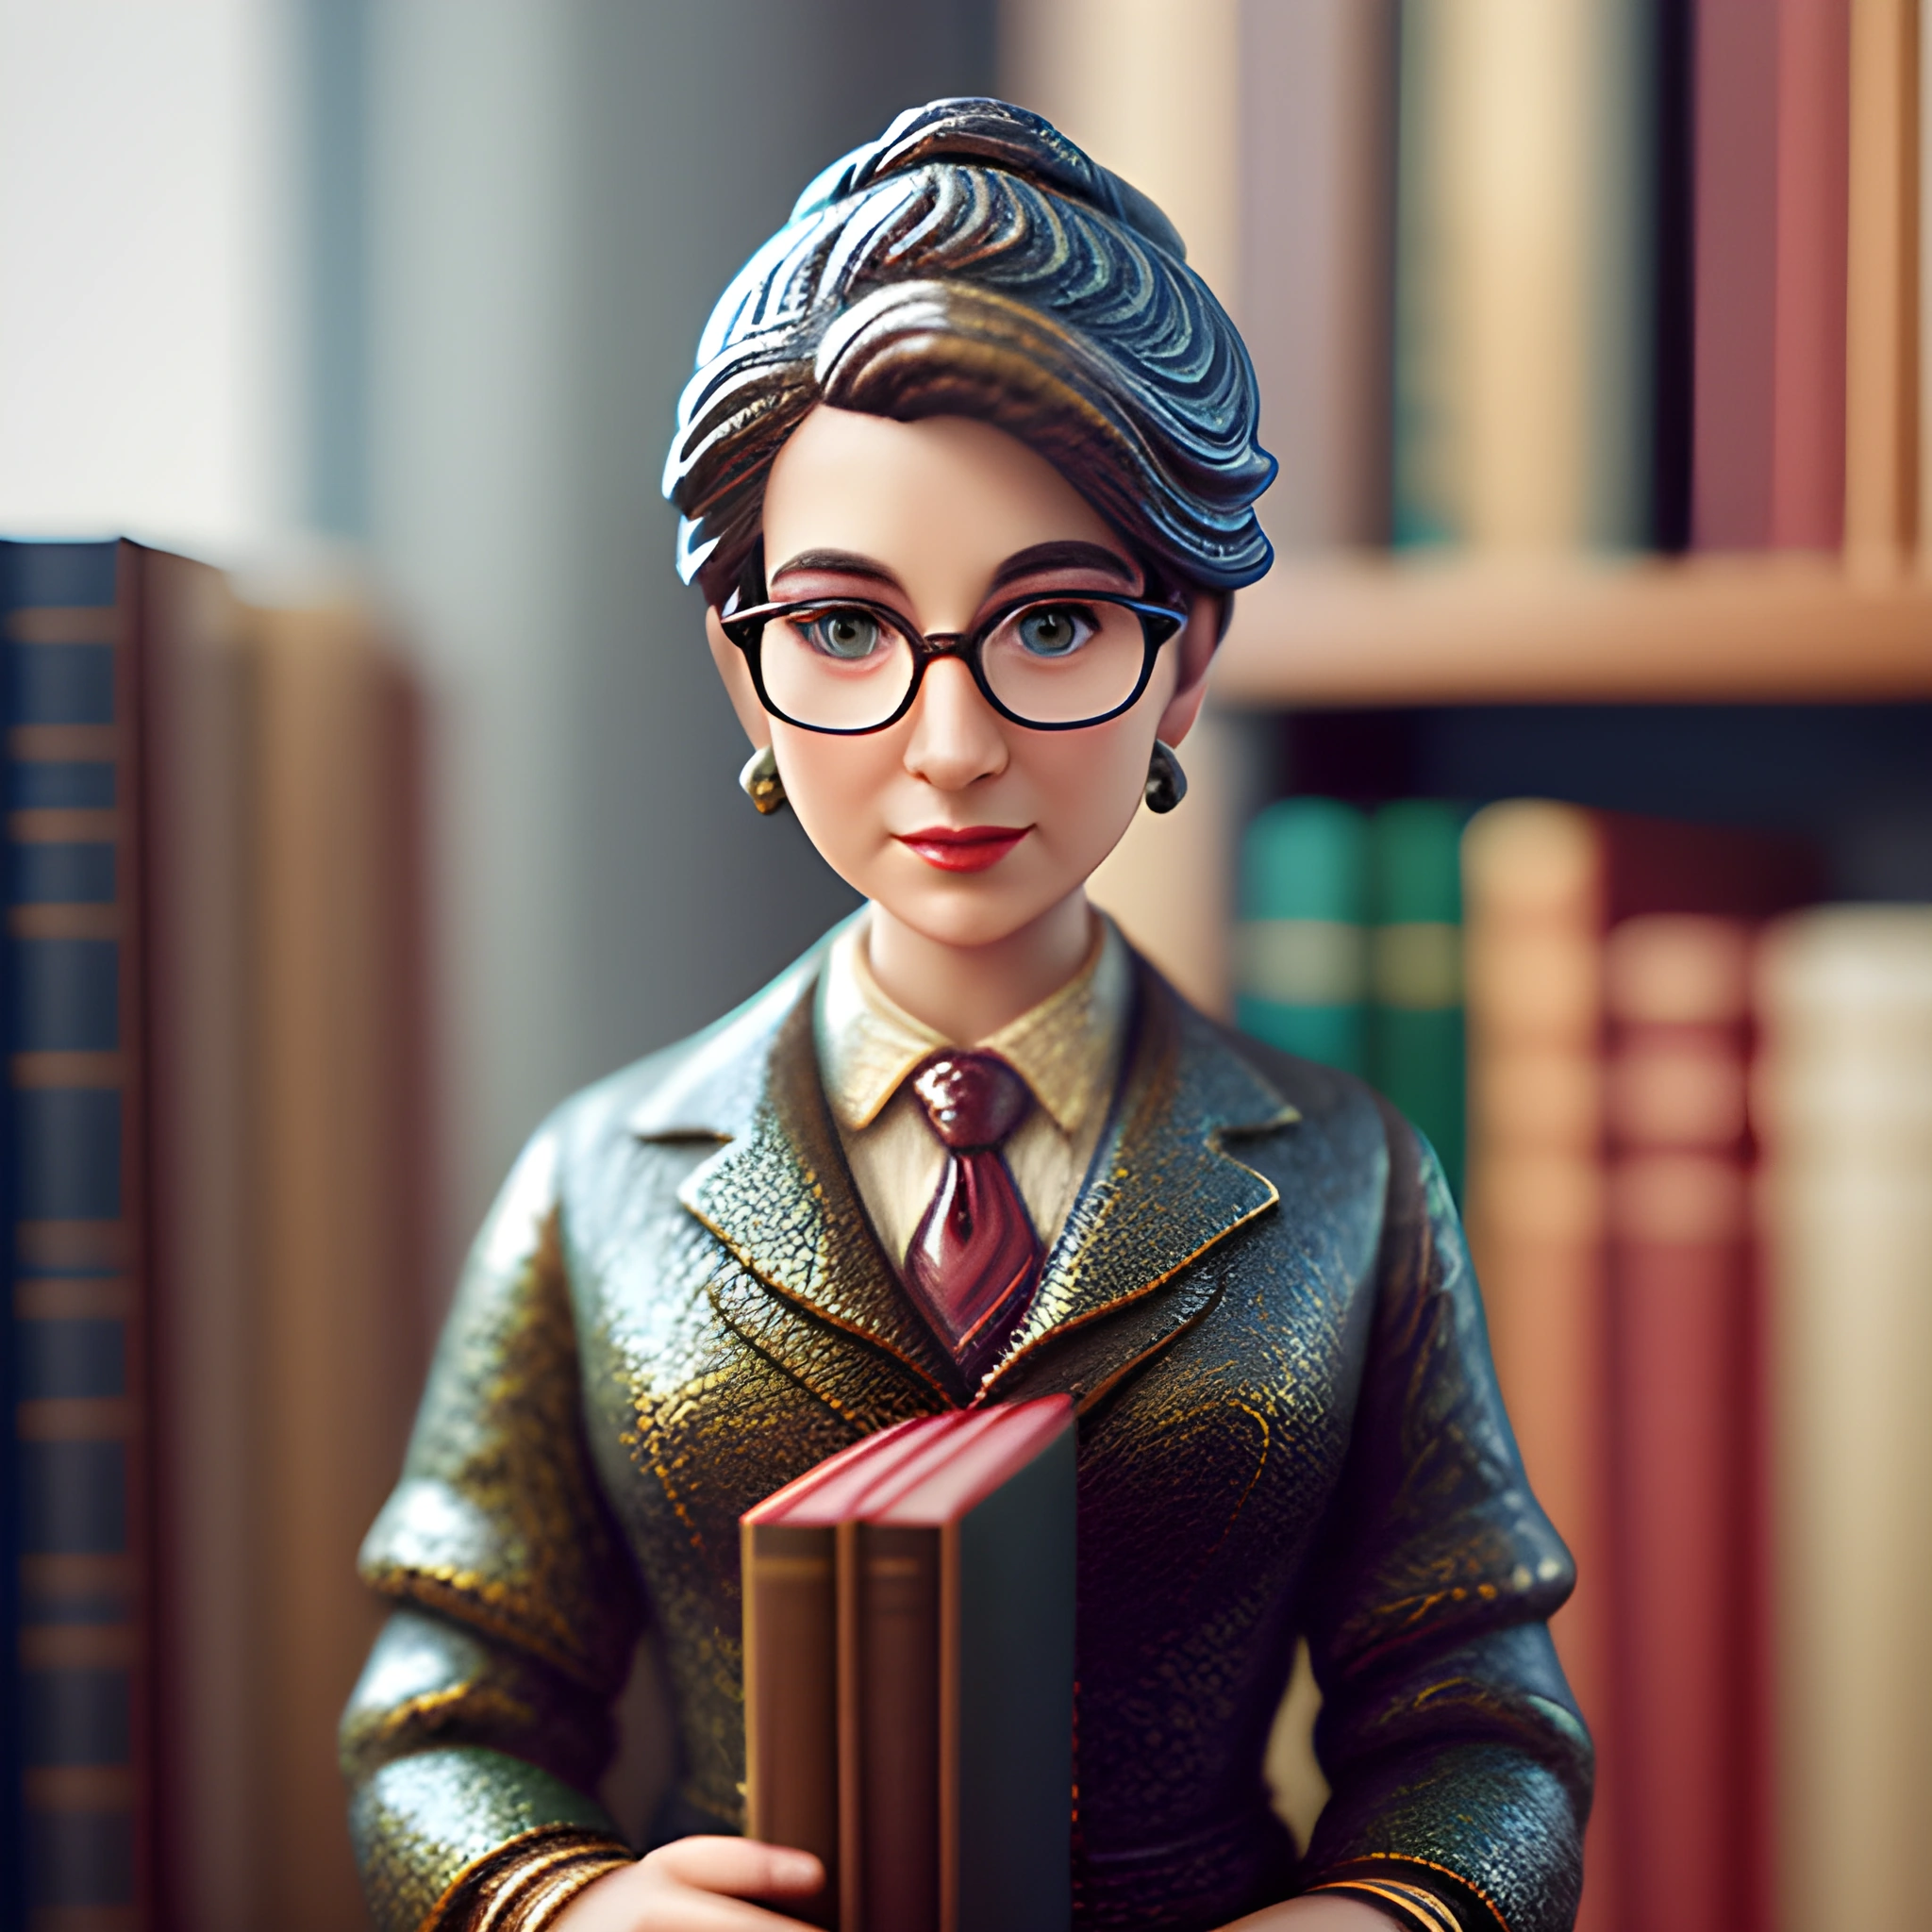 a figurine of a woman holding a book